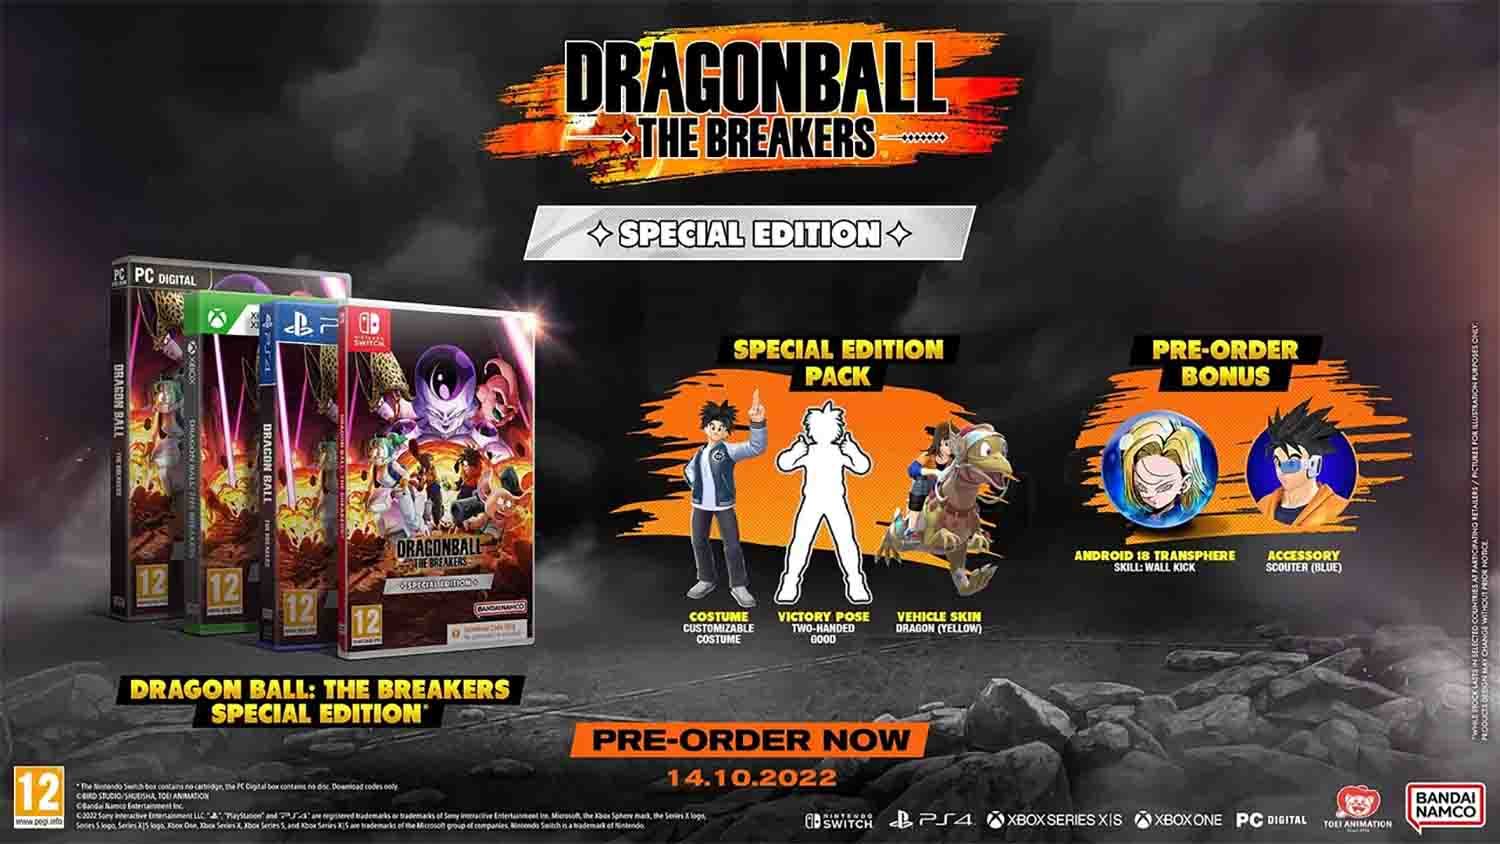 Dragon Ball: The Breakers on X: An Open Beta Test for DRAGON BALL